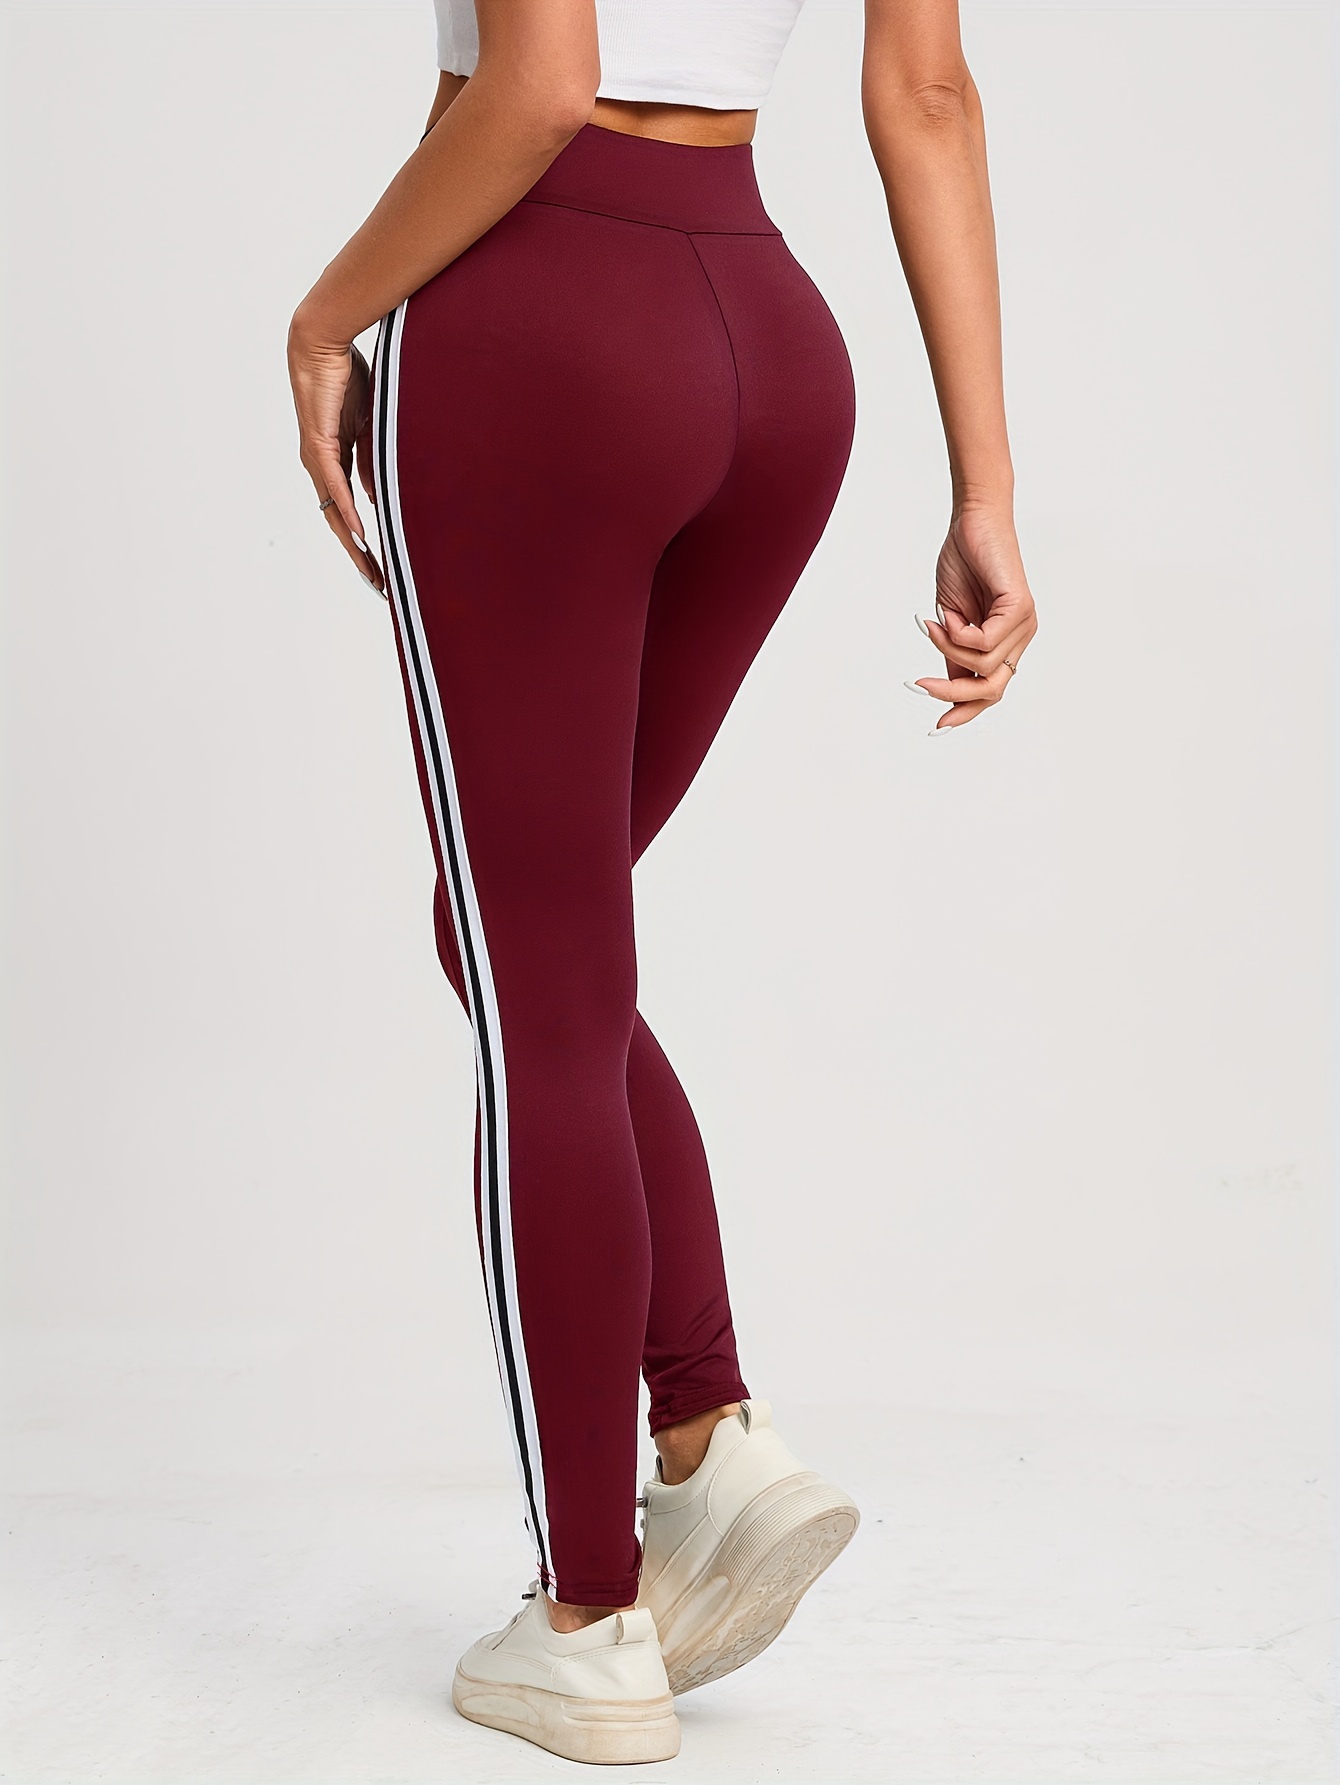 Striped and Perforated Seamless Highwaist Leggings